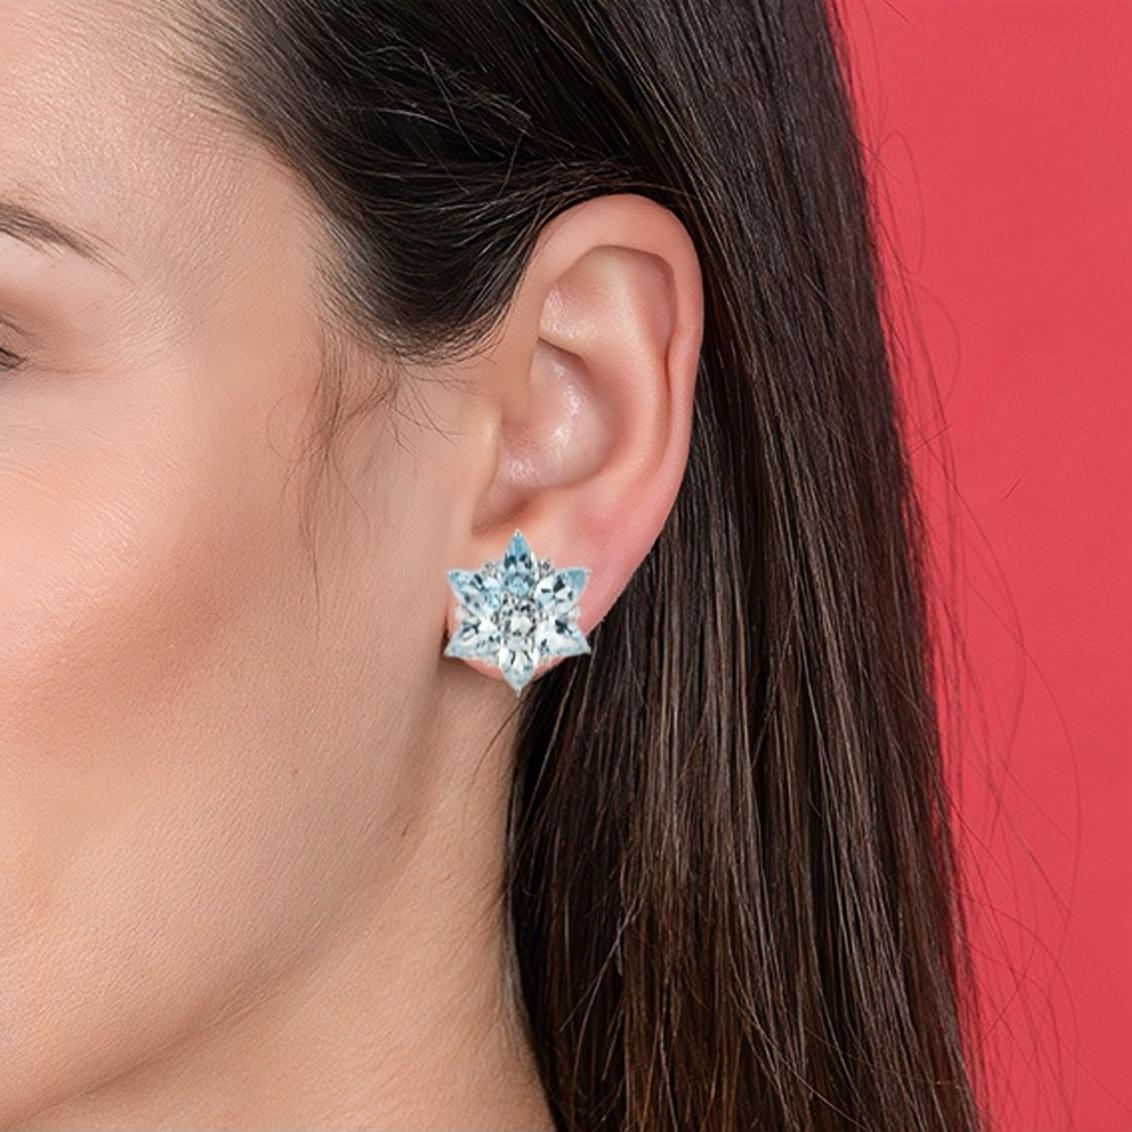 Discover Nina Zhou 4.80ct Aquamarine and 0.18ct Diamond Snowflake Earrings in 14k White Gold. These earrings are a celebration of the season's magic, capturing the essence of glistening snowflakes in a mesmerizing design. Each earring features a